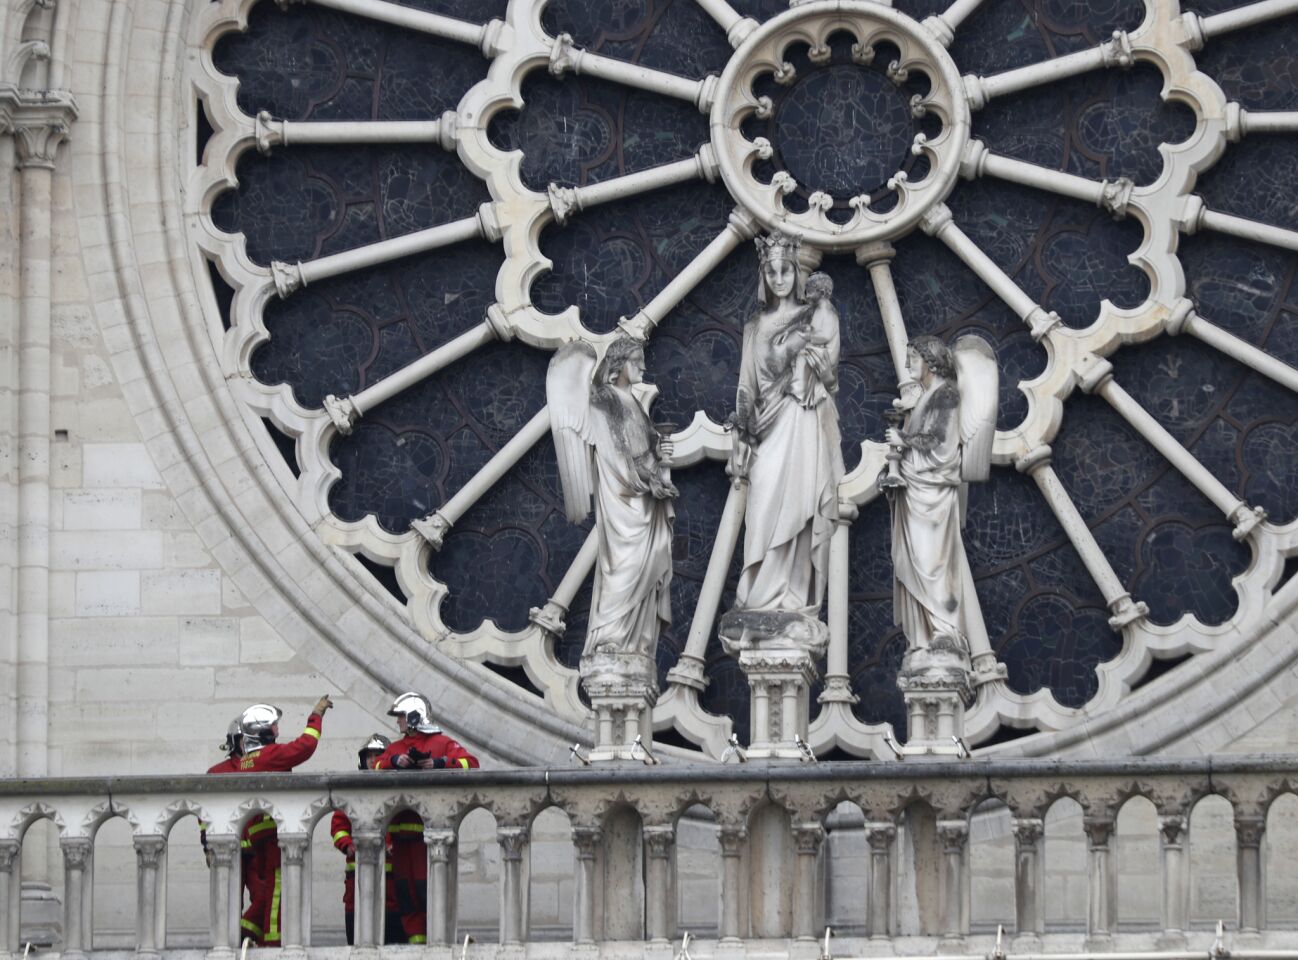 Firefighters talk near a rose window of Notre Dame Cathedral in Paris. Experts assessed the damage April 16 to establish next steps to save what remained the day after a devastating fire.